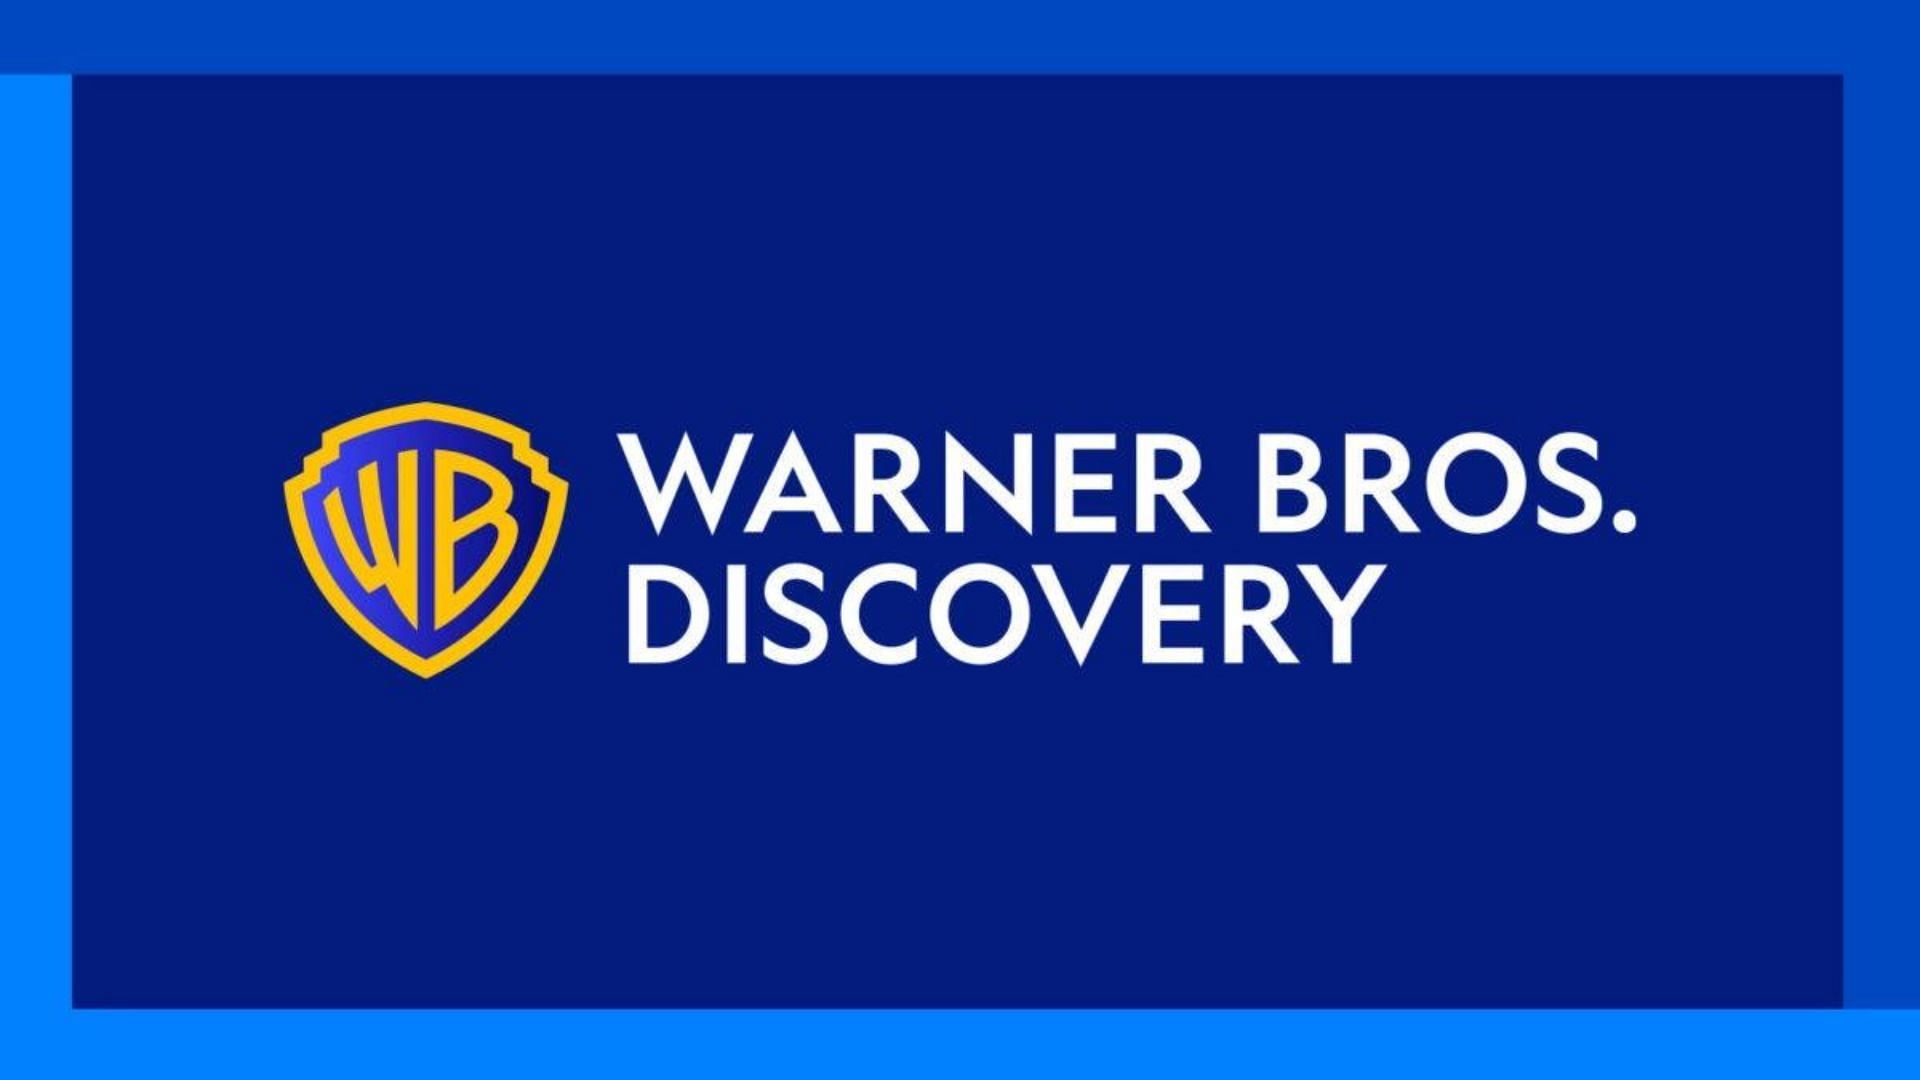 Warner Bros Discovery announces its decision to sell off its music library (Image via Warner Bros.)